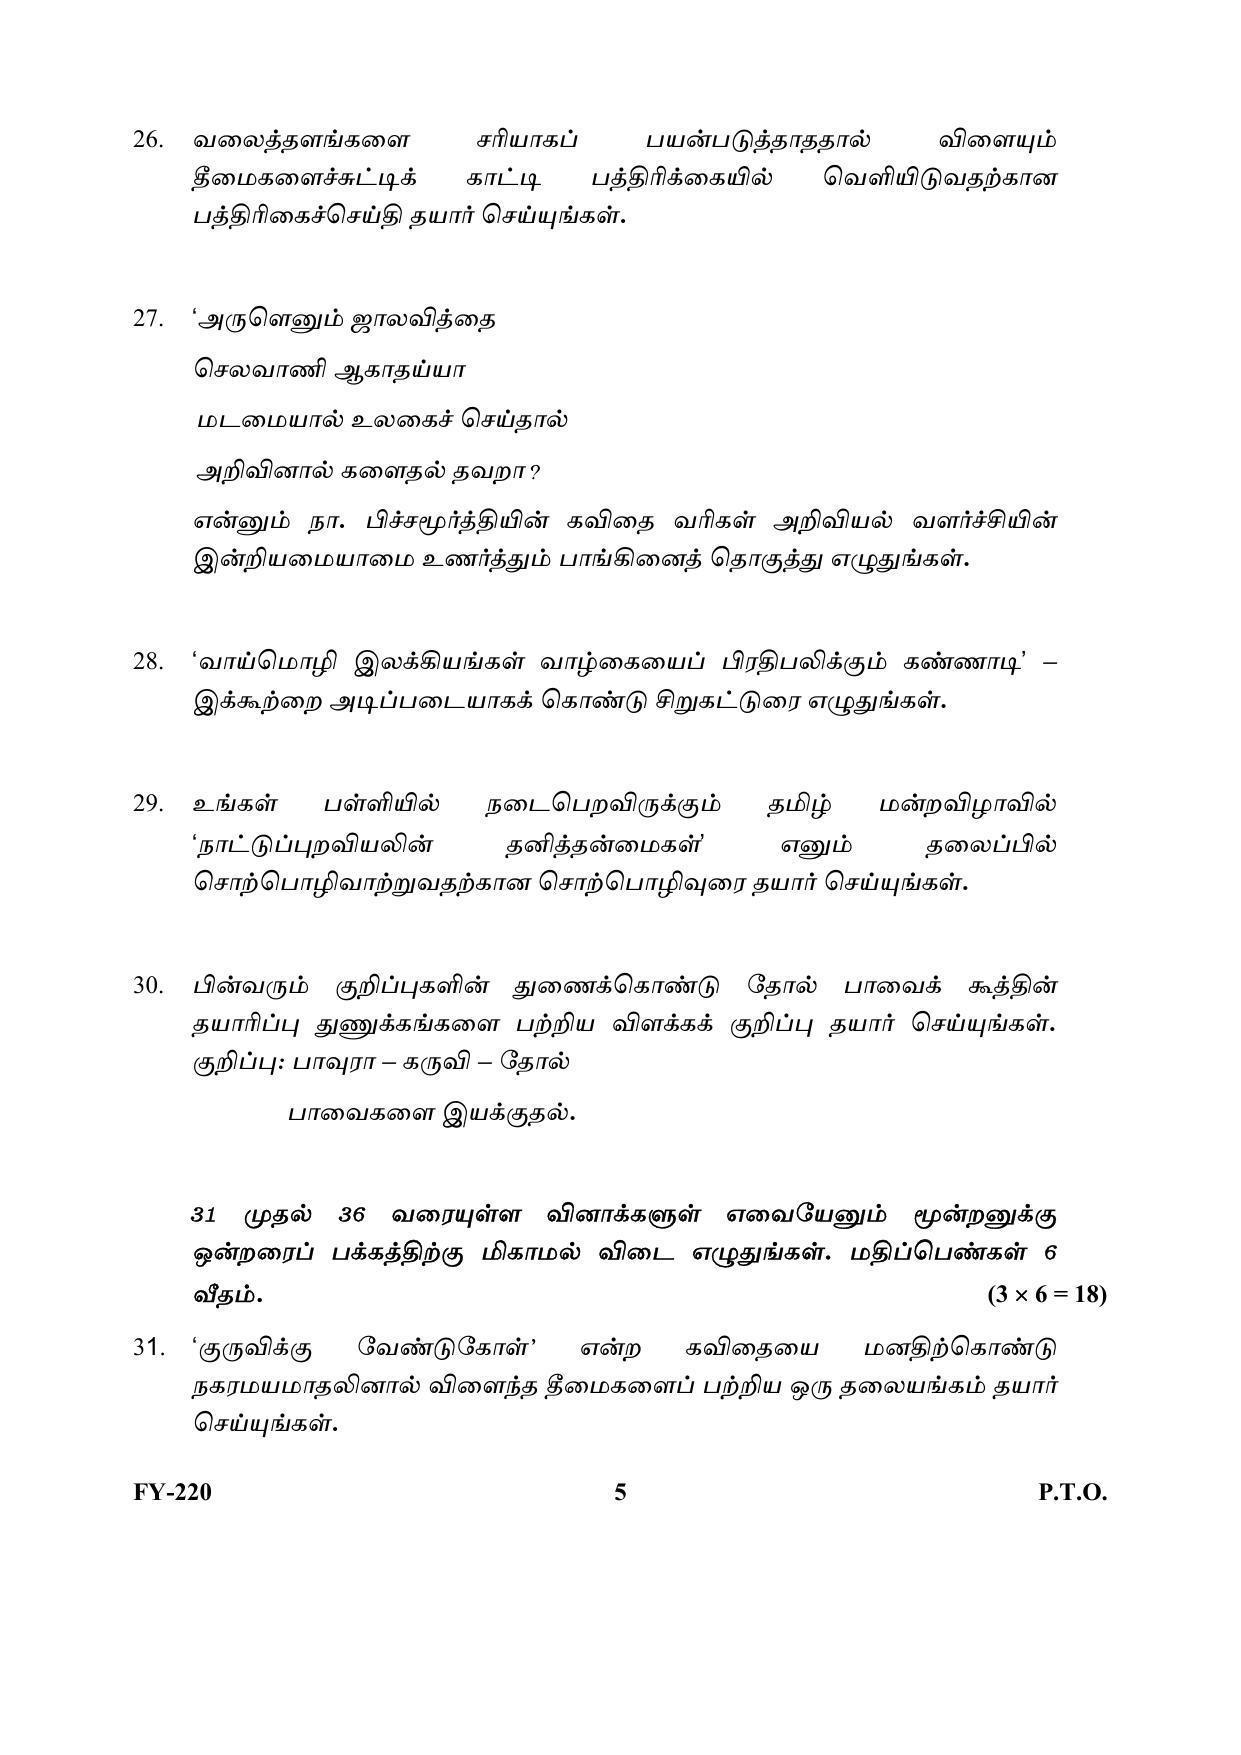 Kerala Plus One (Class 11th) Part-III Tamil-Optional Question Paper 2021 - Page 5